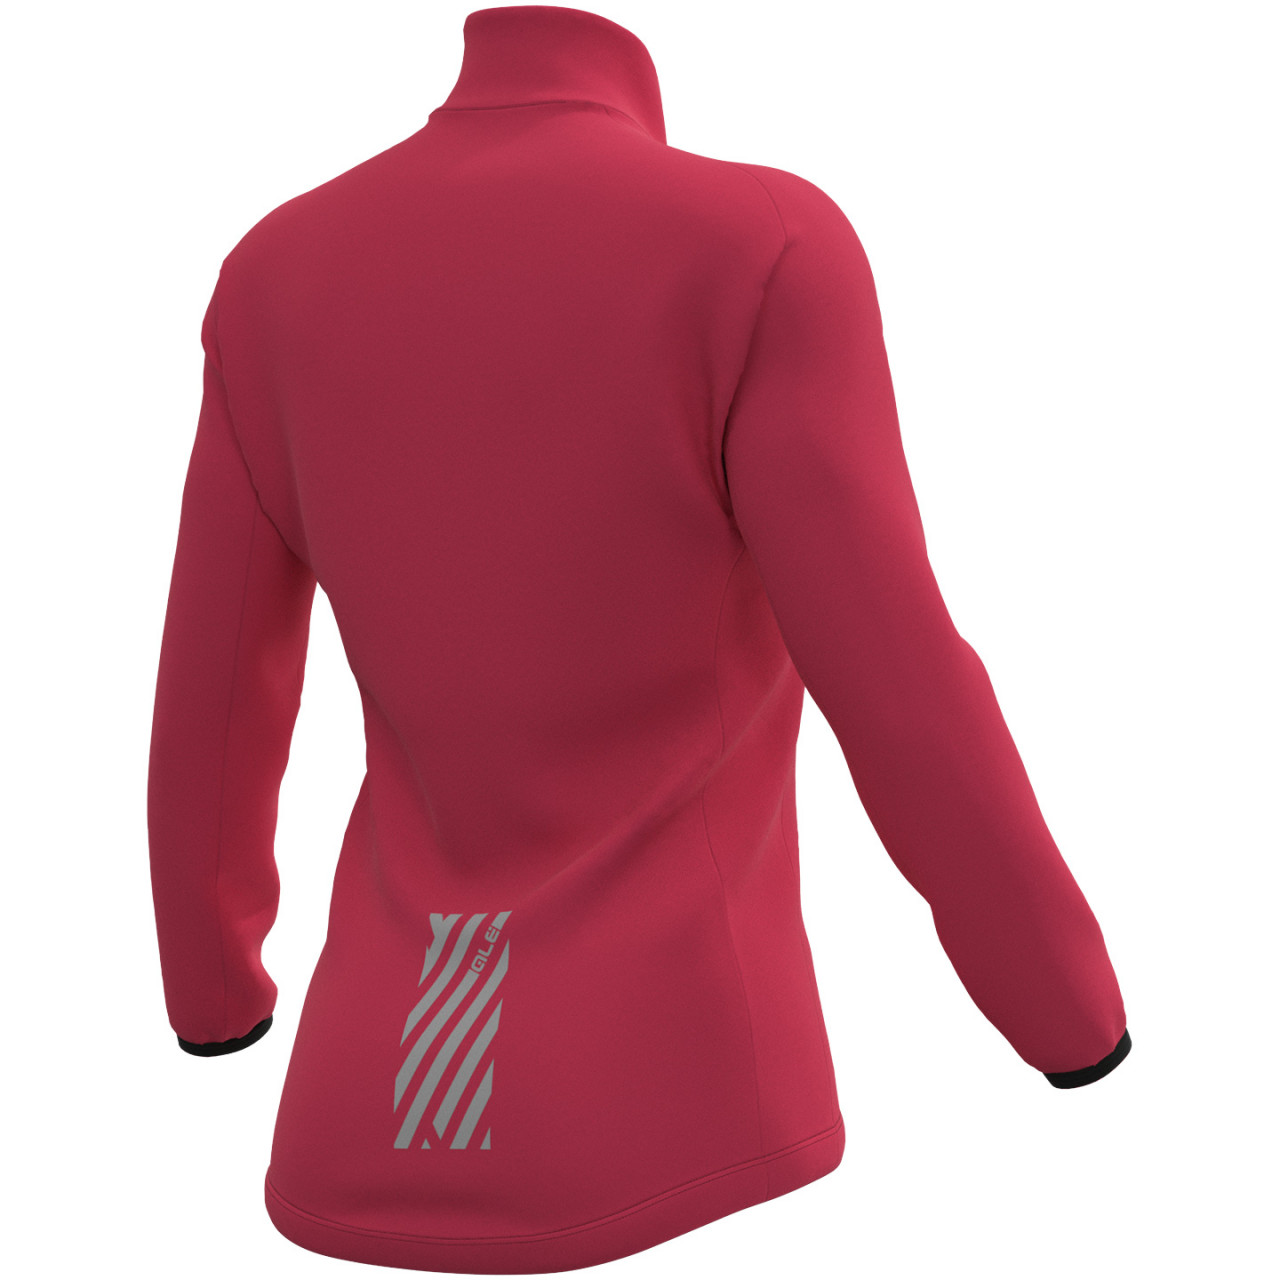 Impermeable mujer Racing